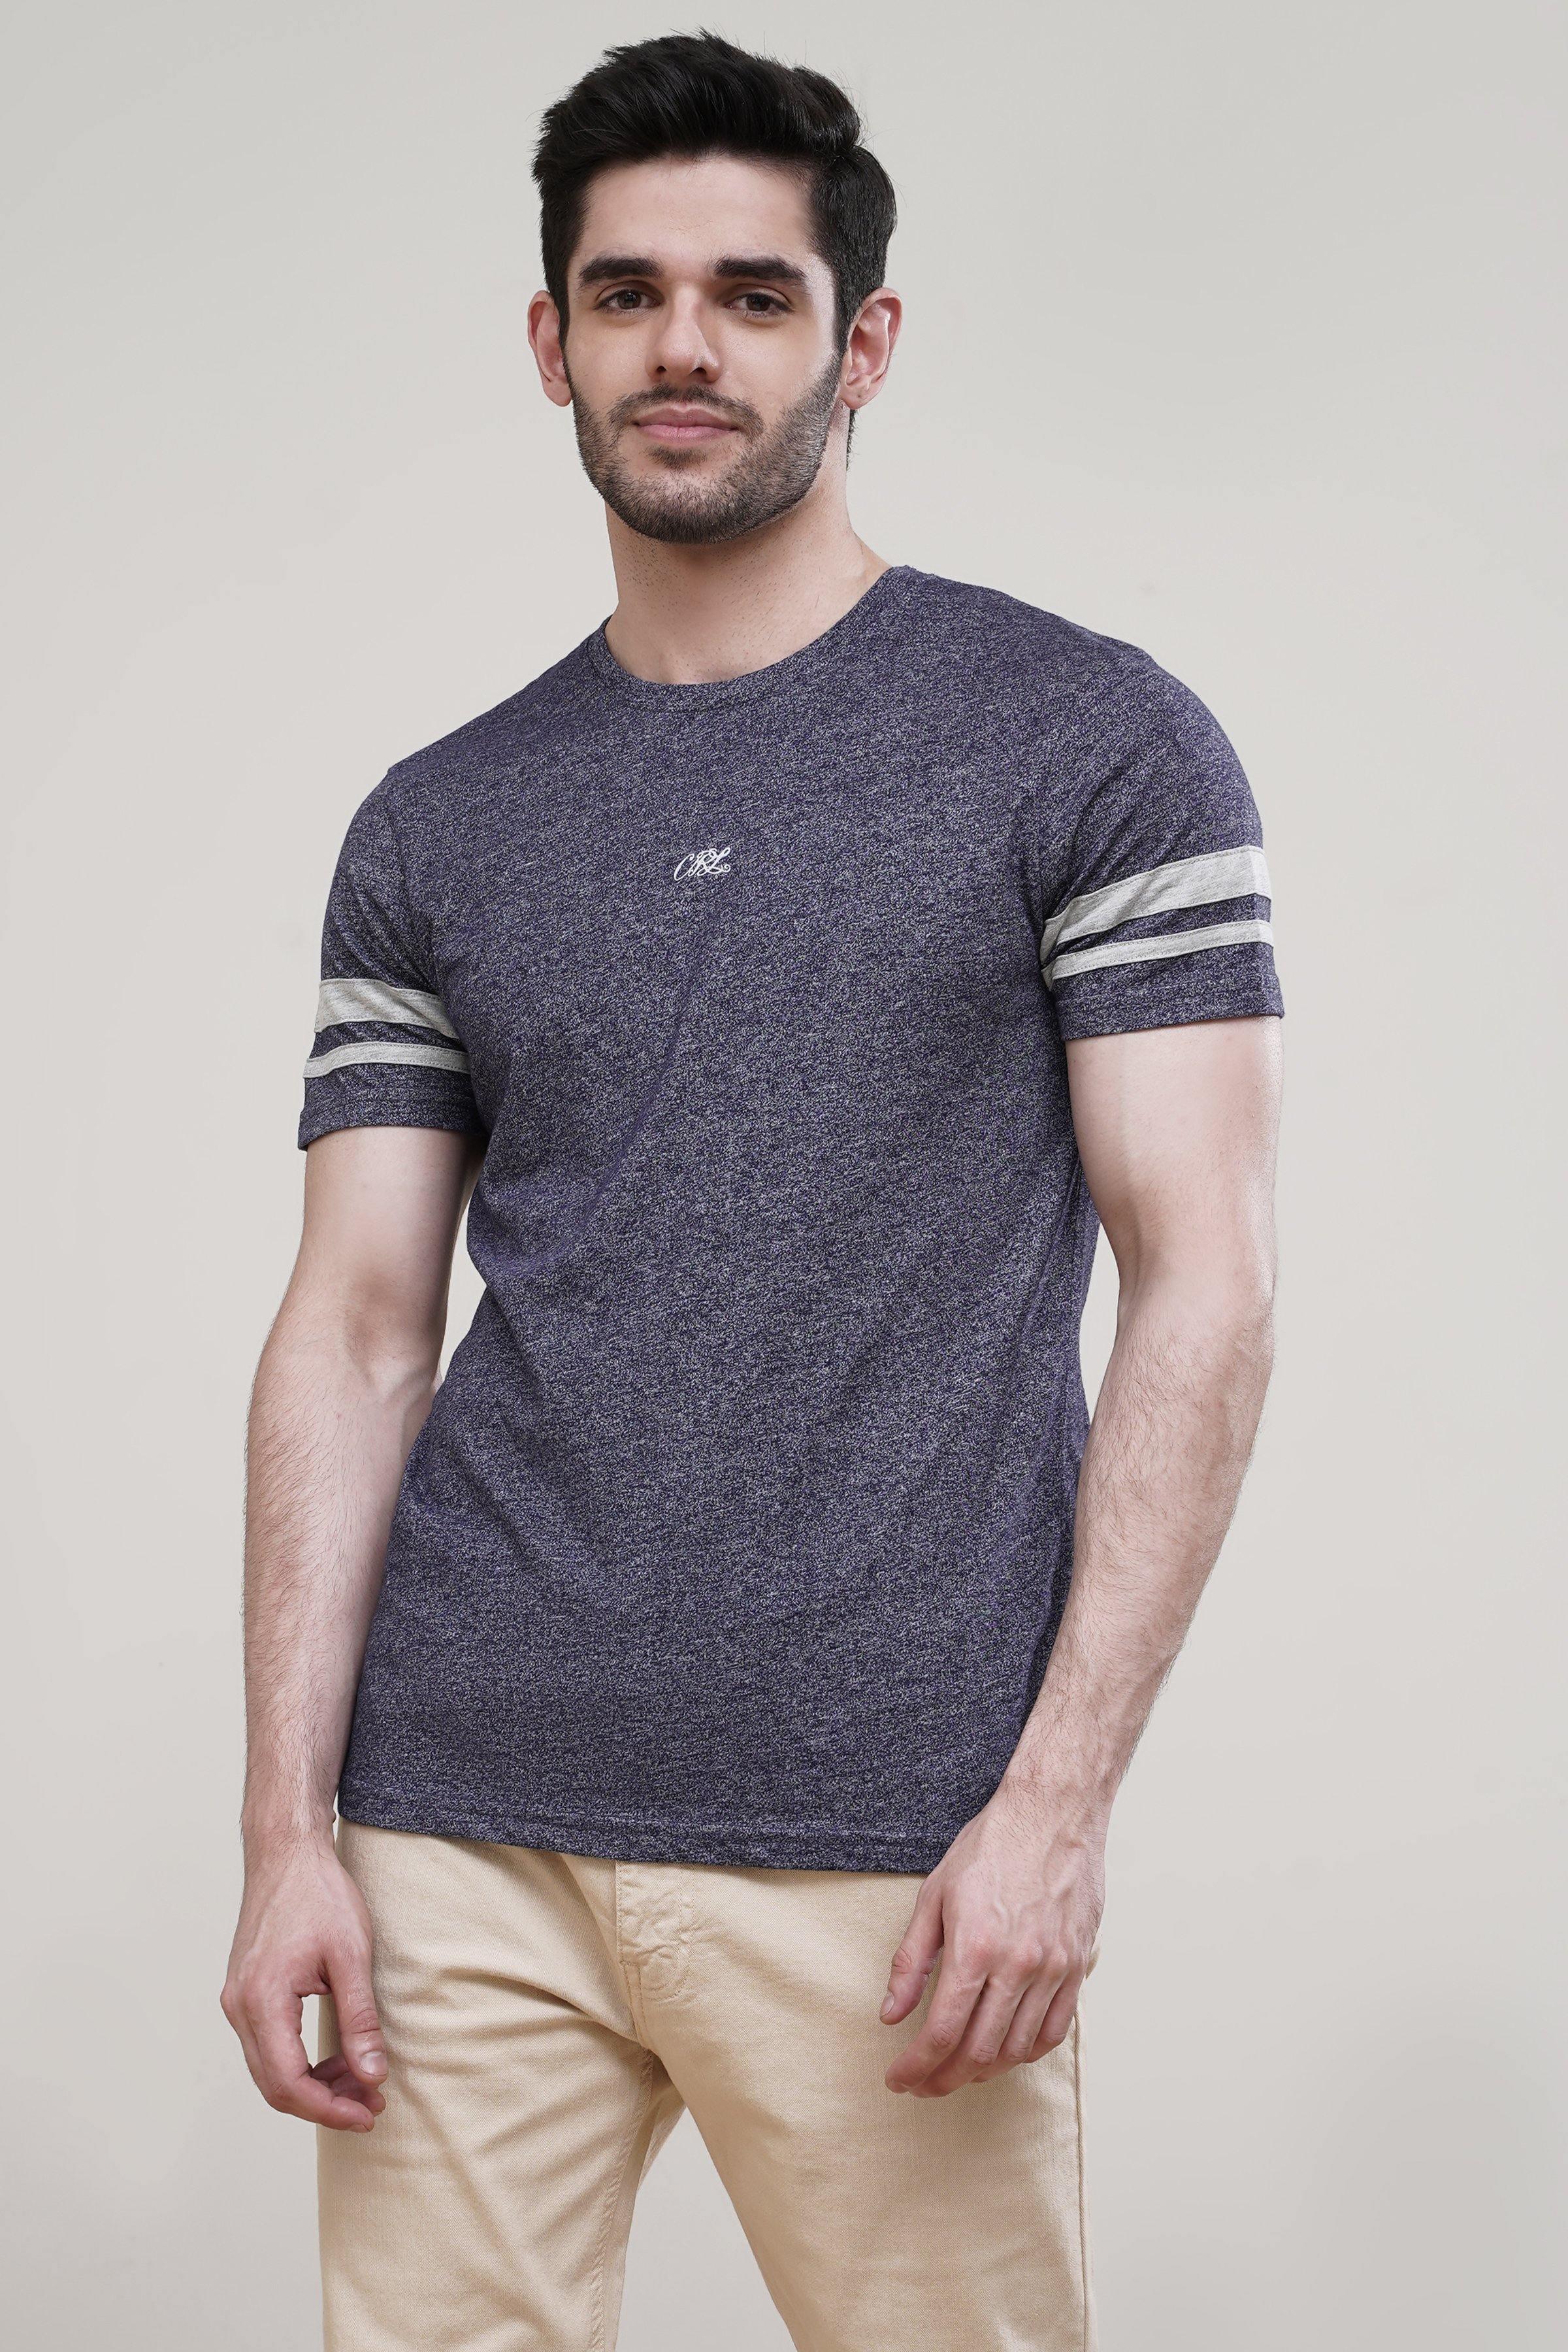 T SHIRT CREW NECK NAVY at Charcoal Clothing